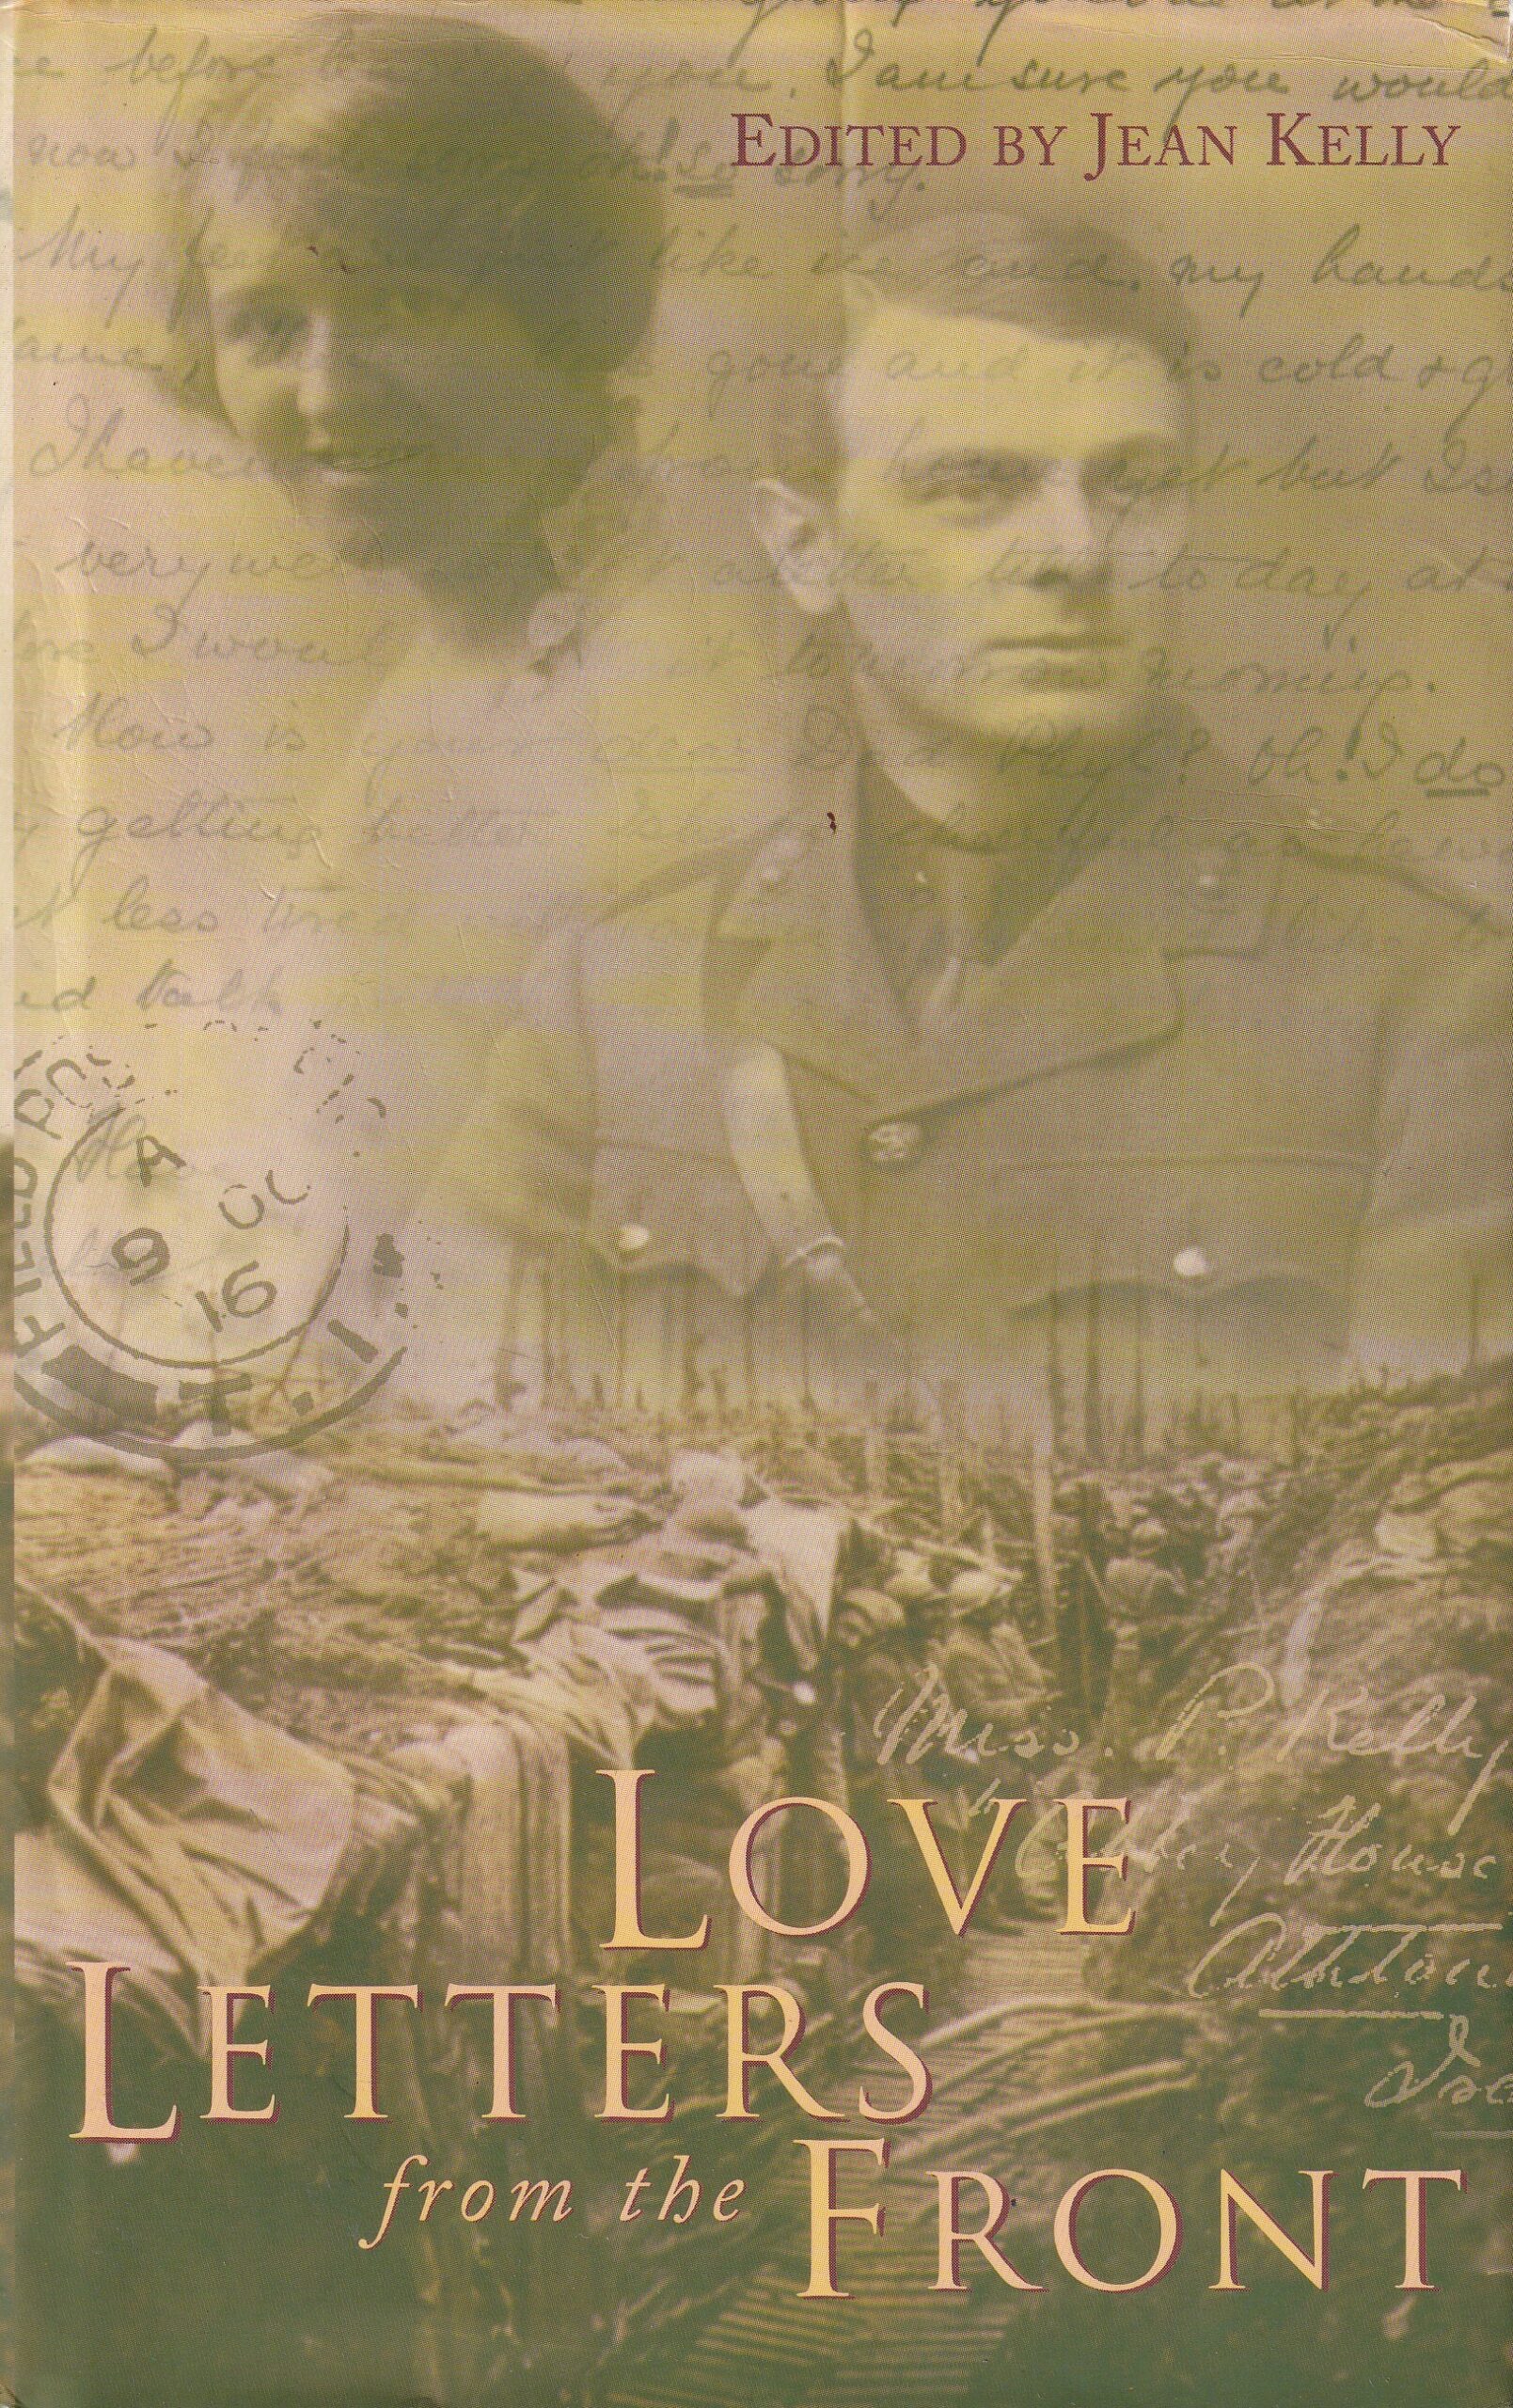 Love Letters from the Front by Jean Kelly (ed.)